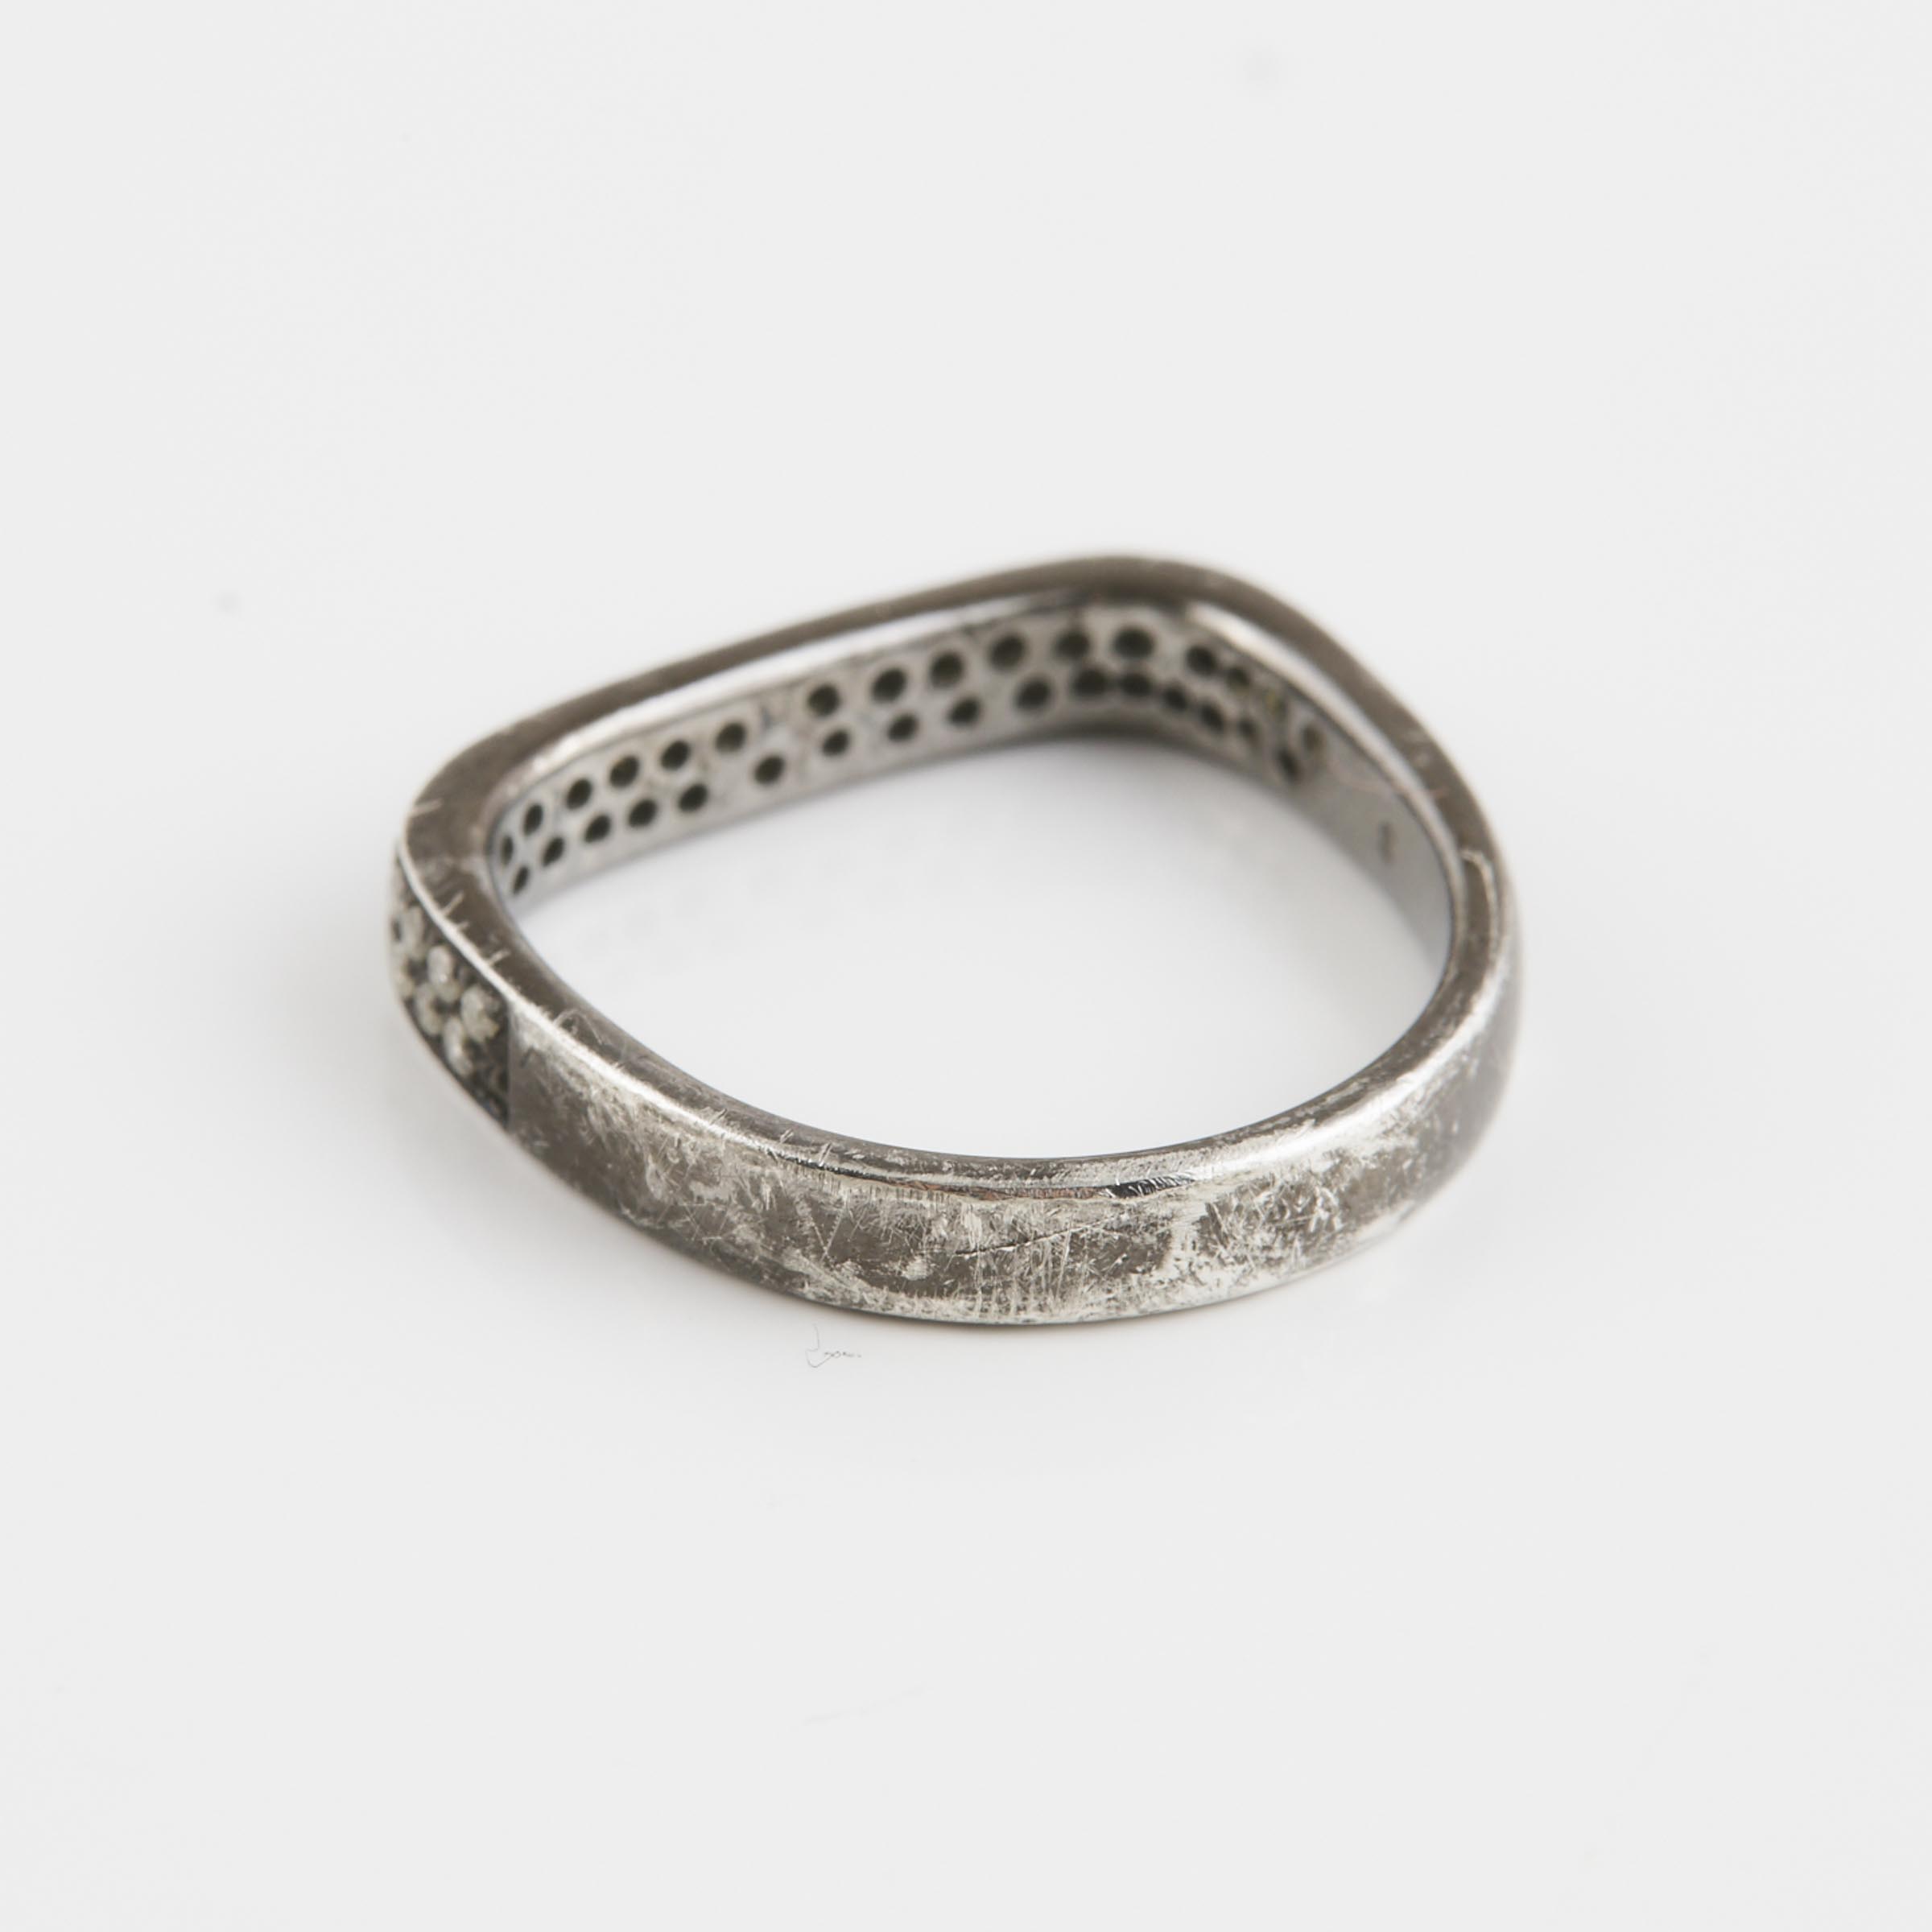 Blackened Sterling Silver Ring